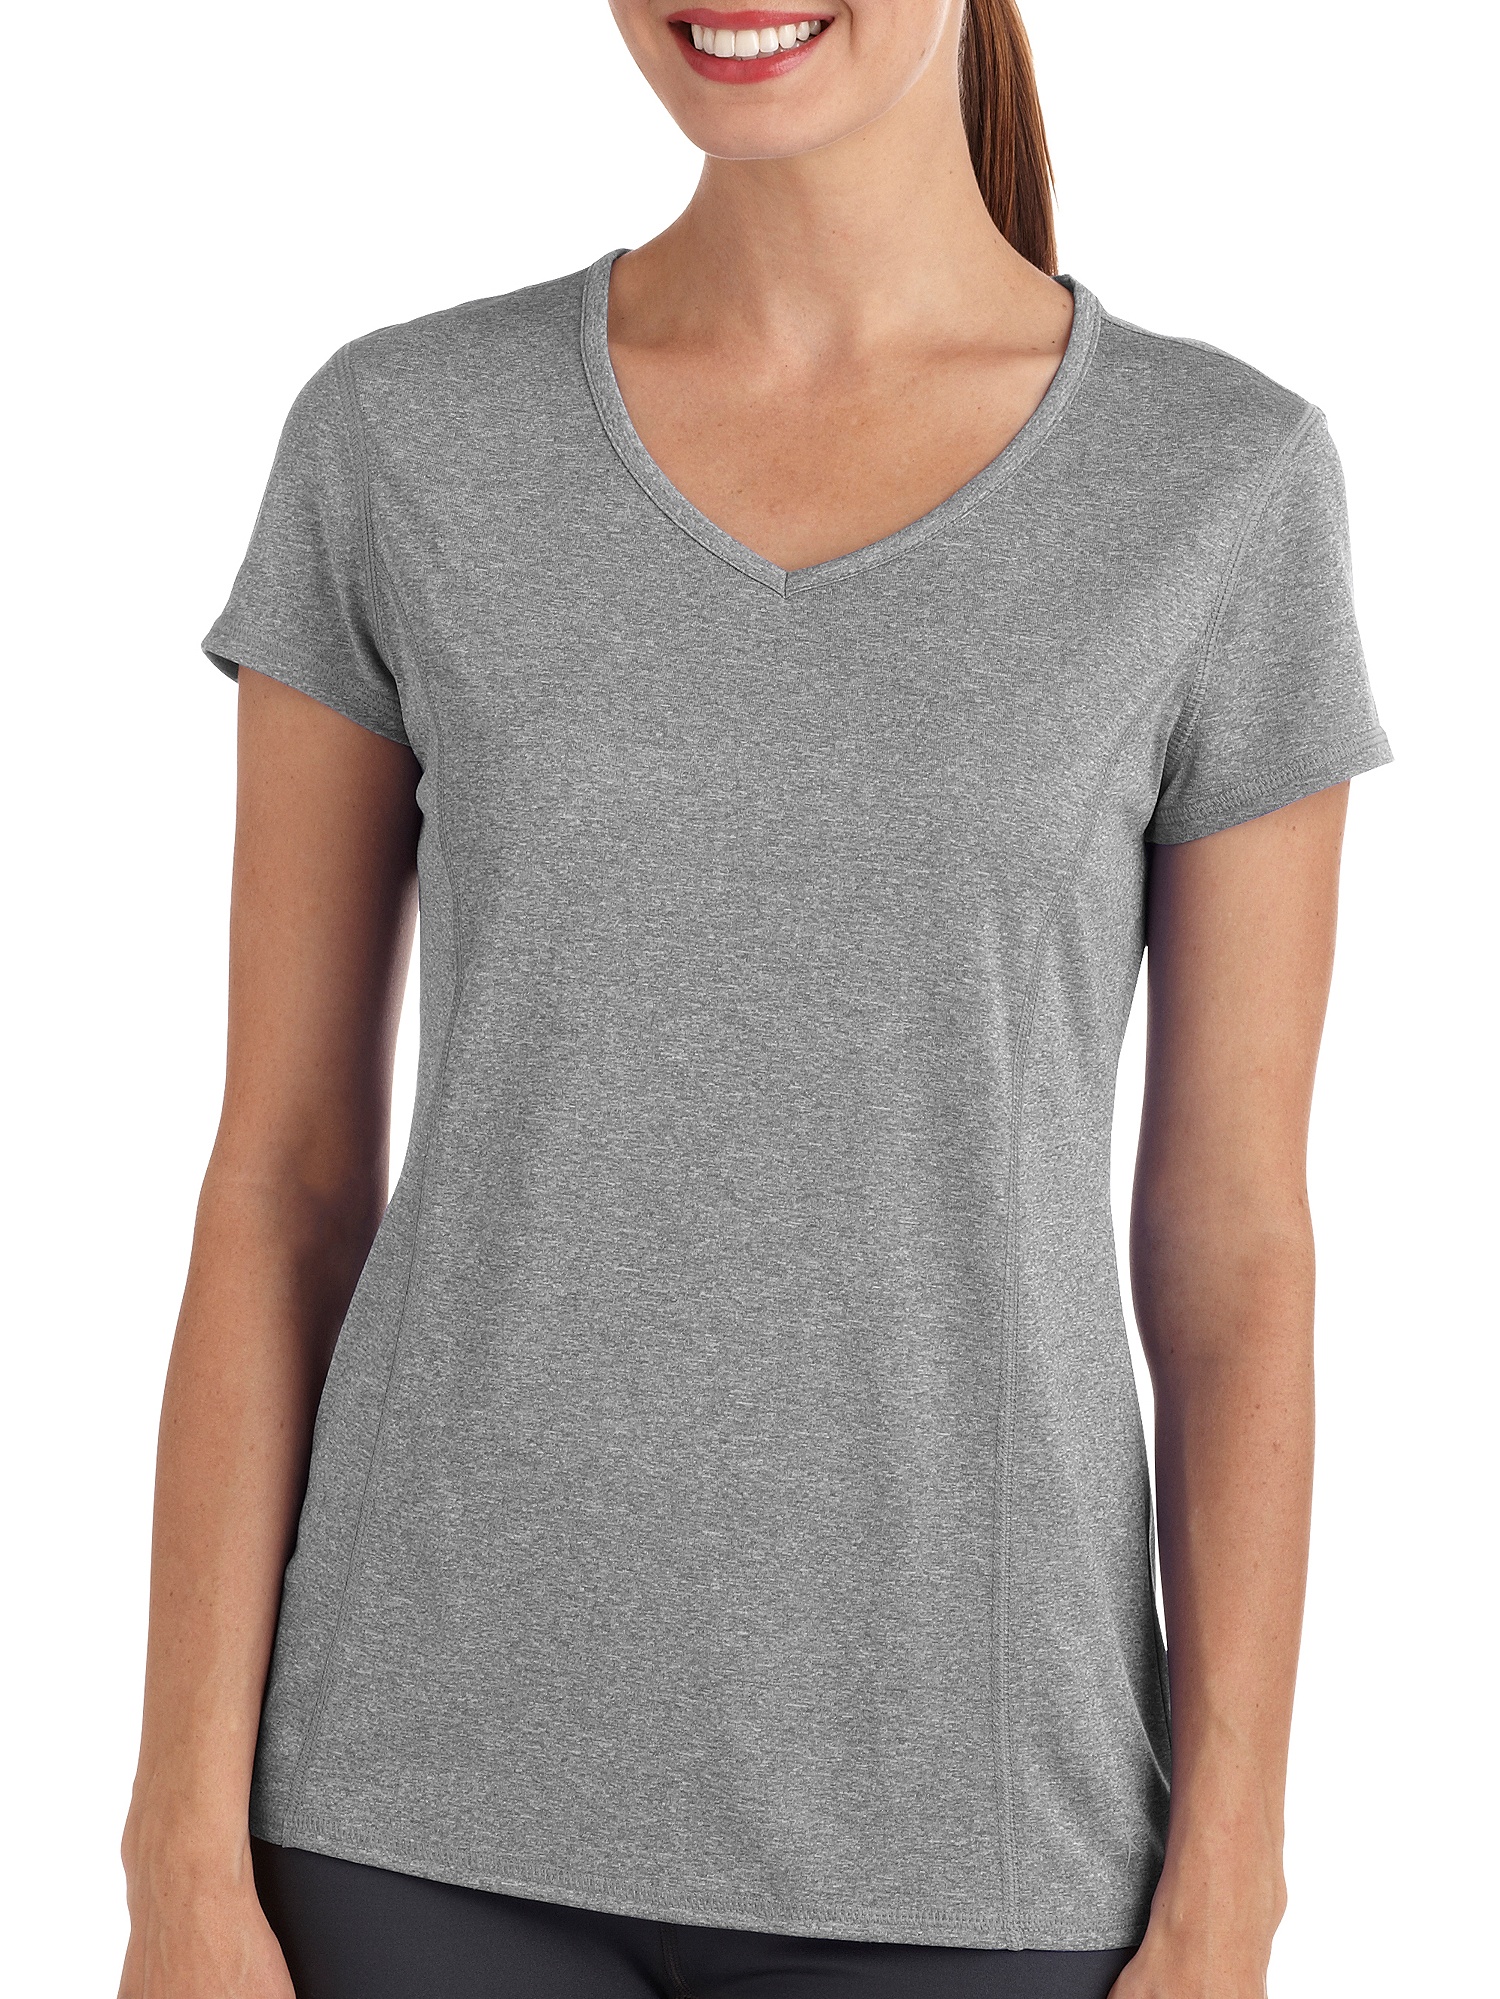 Danskin Now Women's Performance Tee With Flattering Seaming and Wicking 2-Pack - image 3 of 4